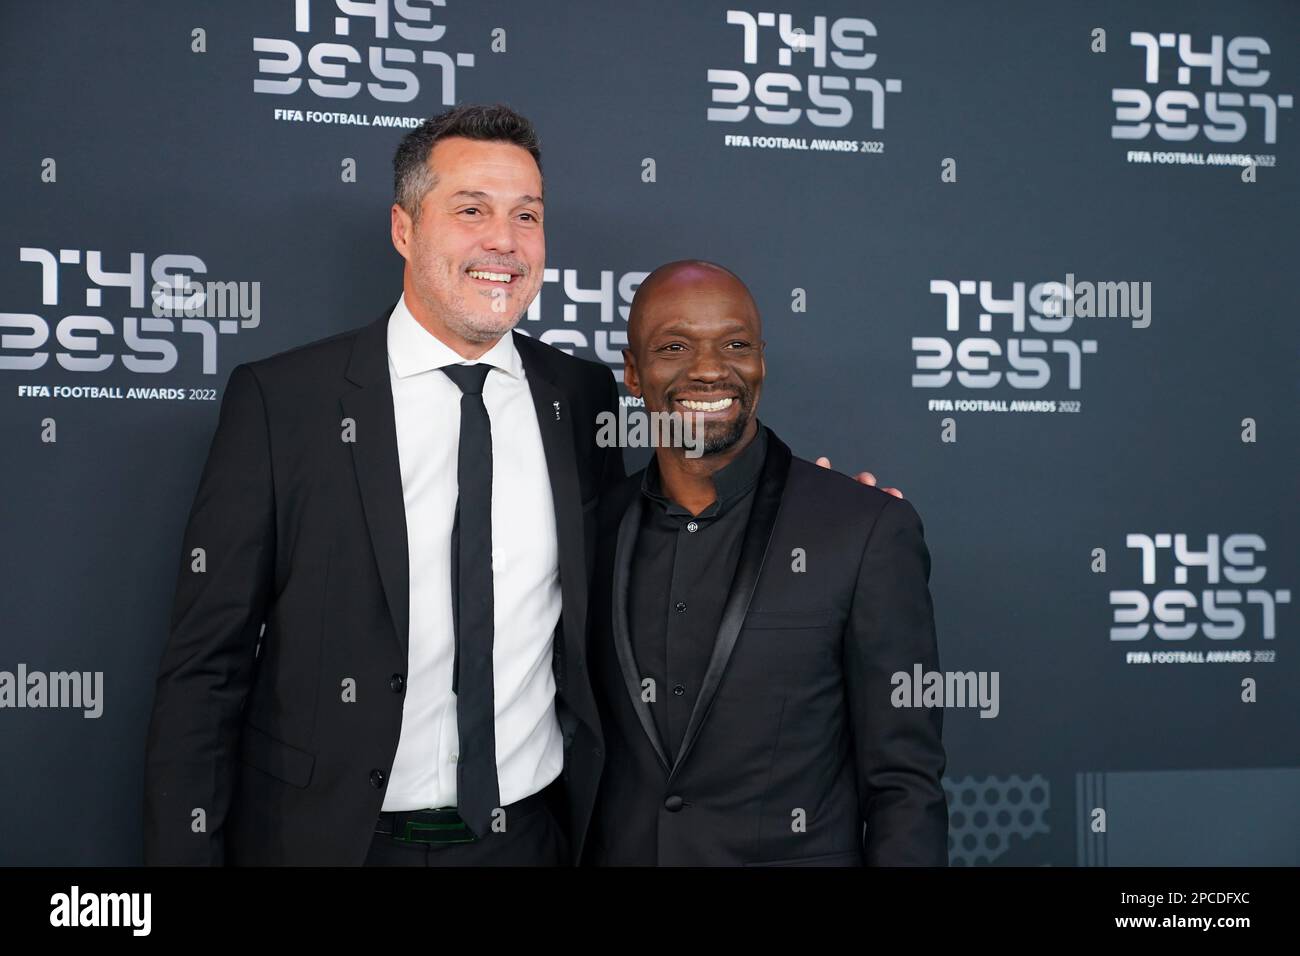 Paris, France. 27th Feb, 2023. Julio Cesar (former Brazil football player) and Claude Makelele (former France player) pose for a photo on the Green Carpet during the The Best FIFA Football Awards 2022 at Salle Pleyel in Paris, France. (Foto: Daniela Porcelli/Sports Press Photo/C - ONE HOUR DEADLINE - ONLY ACTIVATE FTP IF IMAGES LESS THAN ONE HOUR OLD - Alamy) Credit: SPP Sport Press Photo. /Alamy Live News Stock Photo